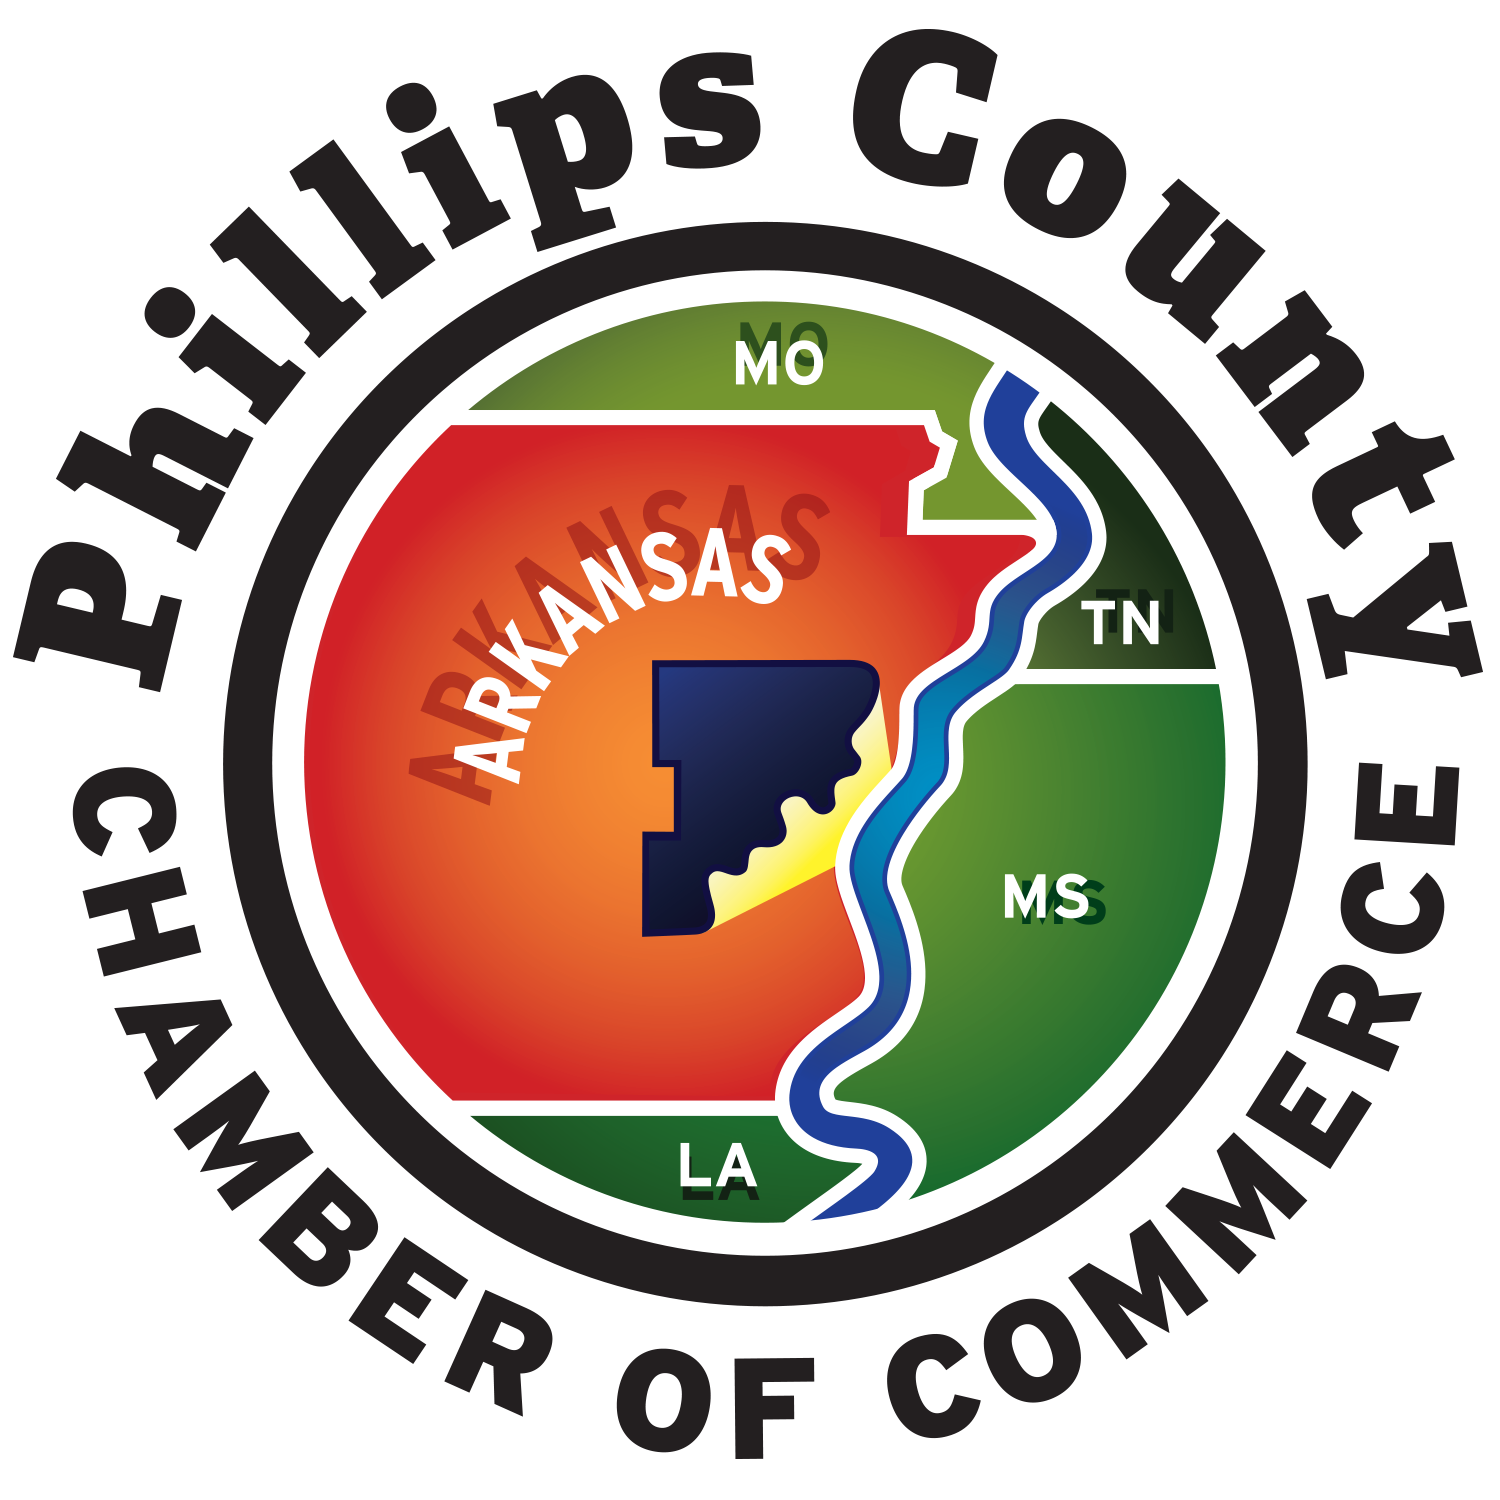 Phillips County Chamber of Commerce